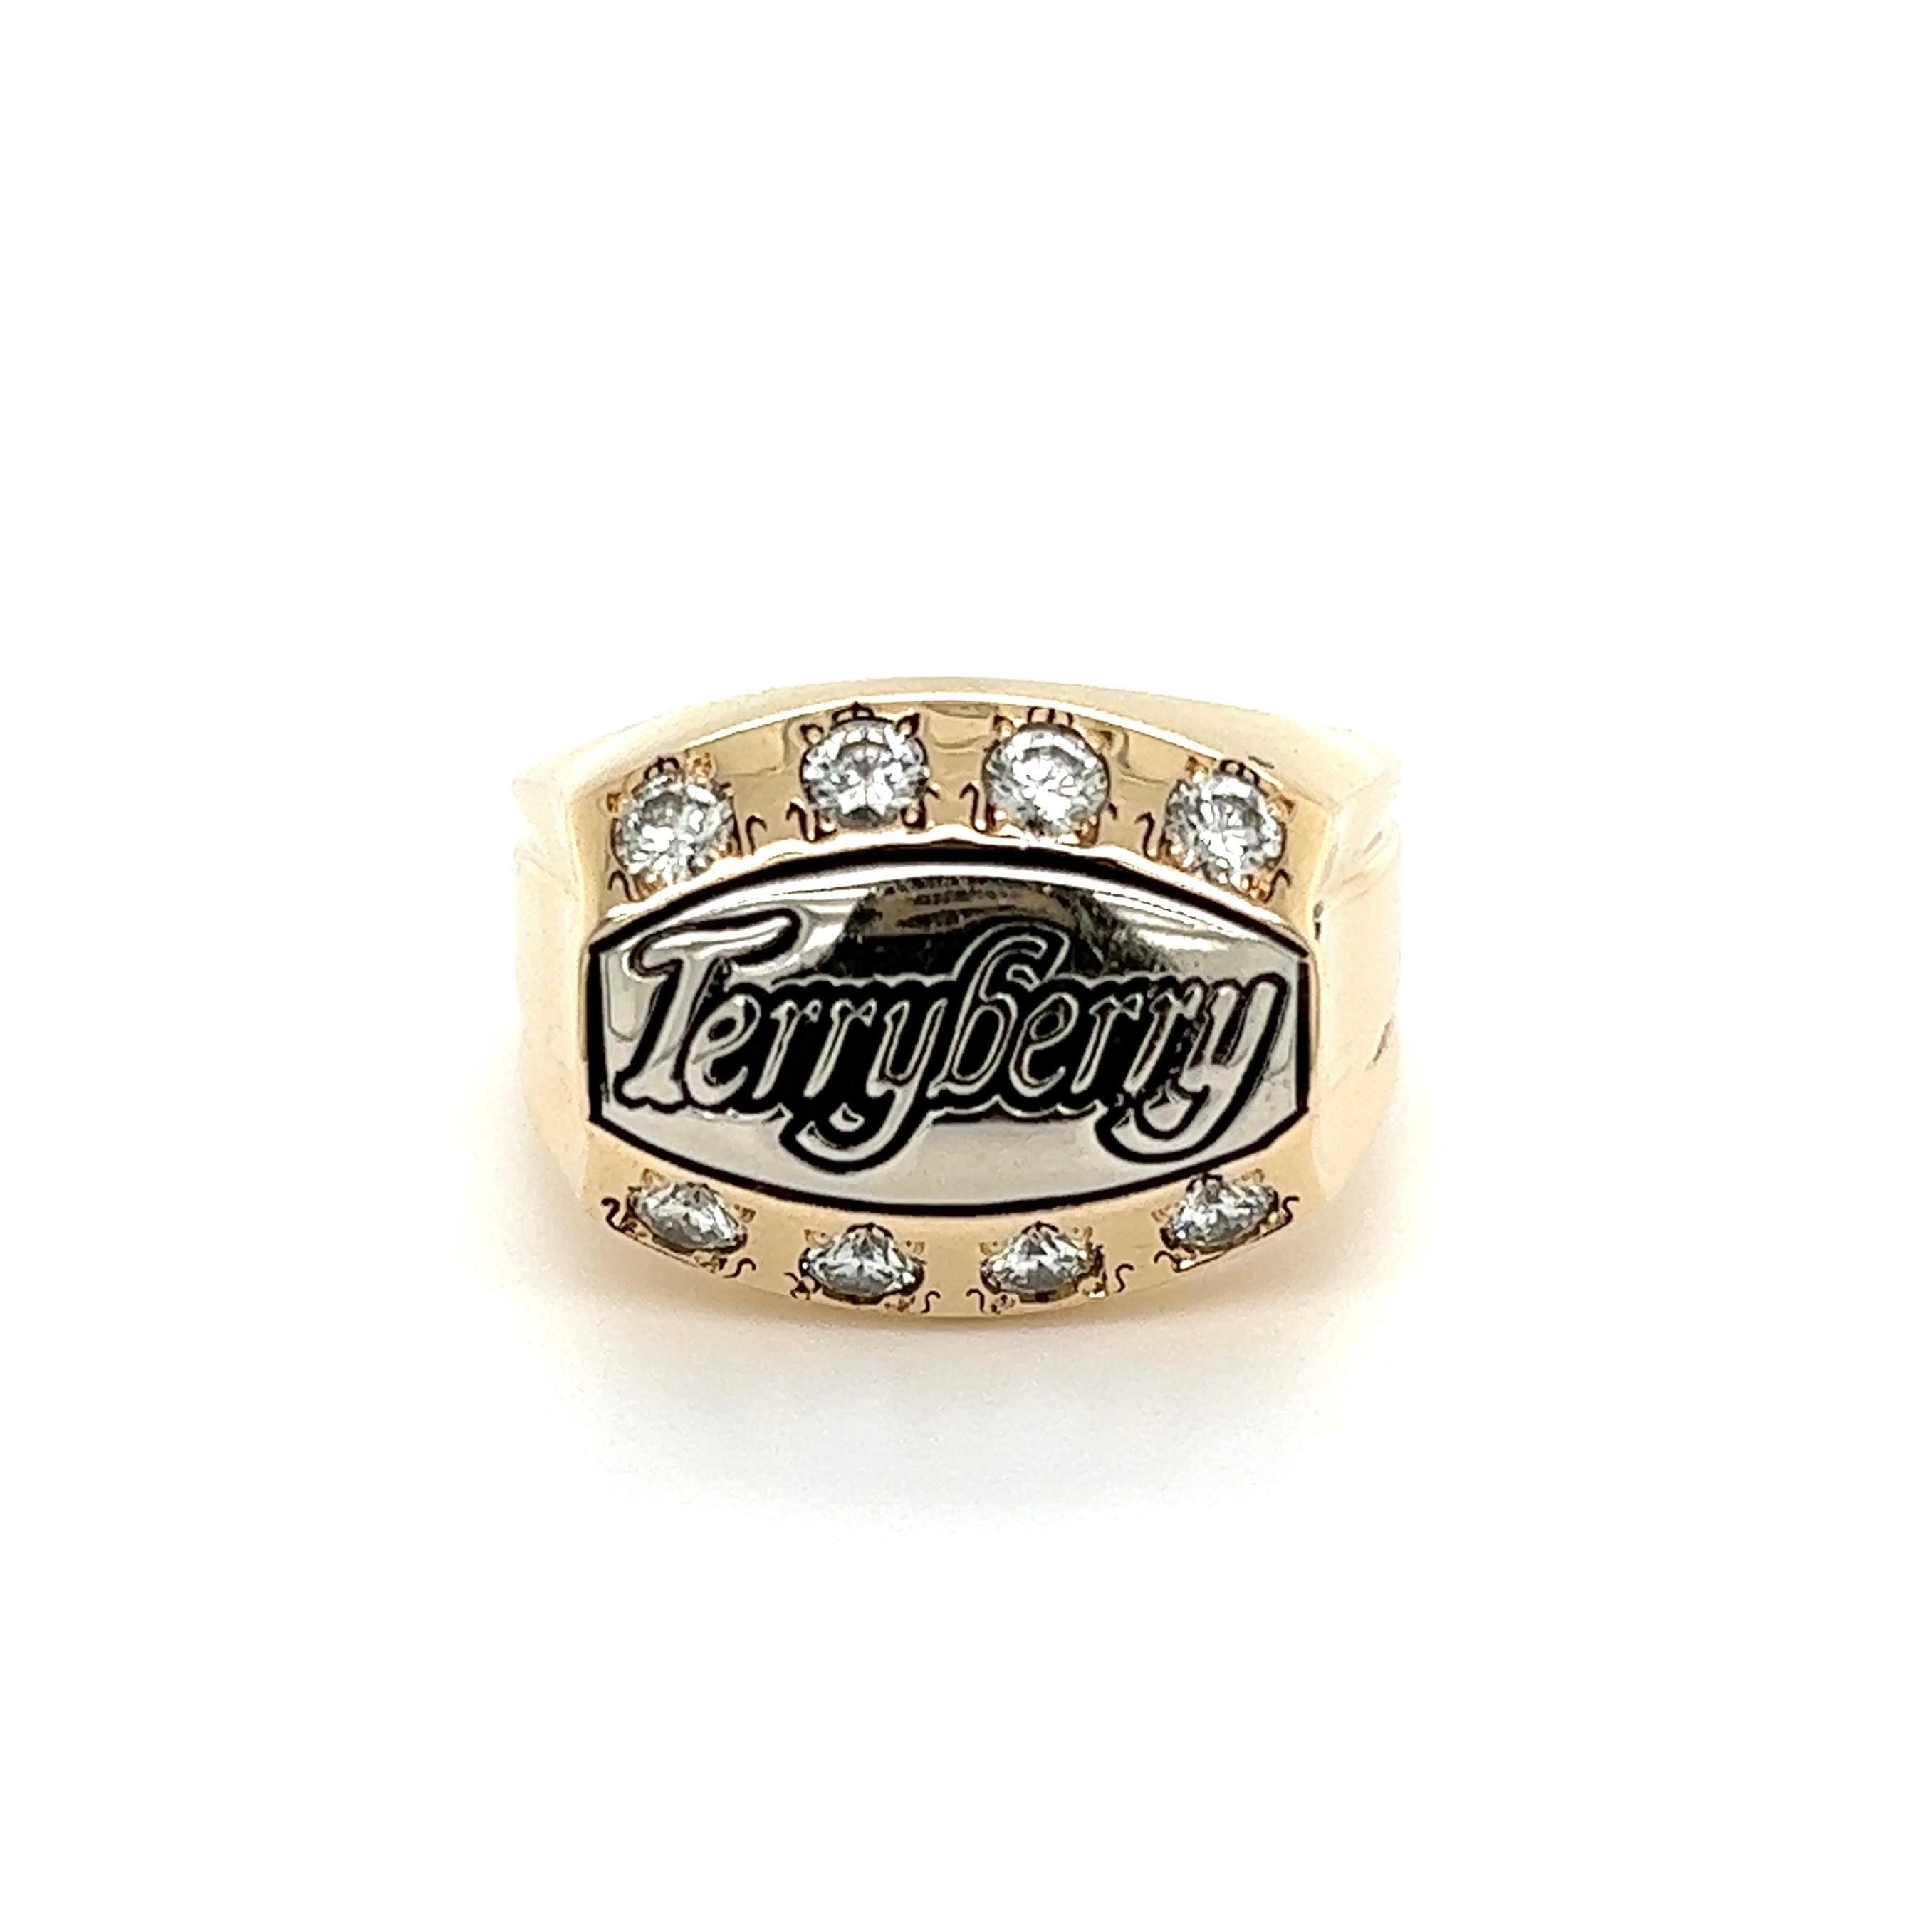 terryberry 10k ring value